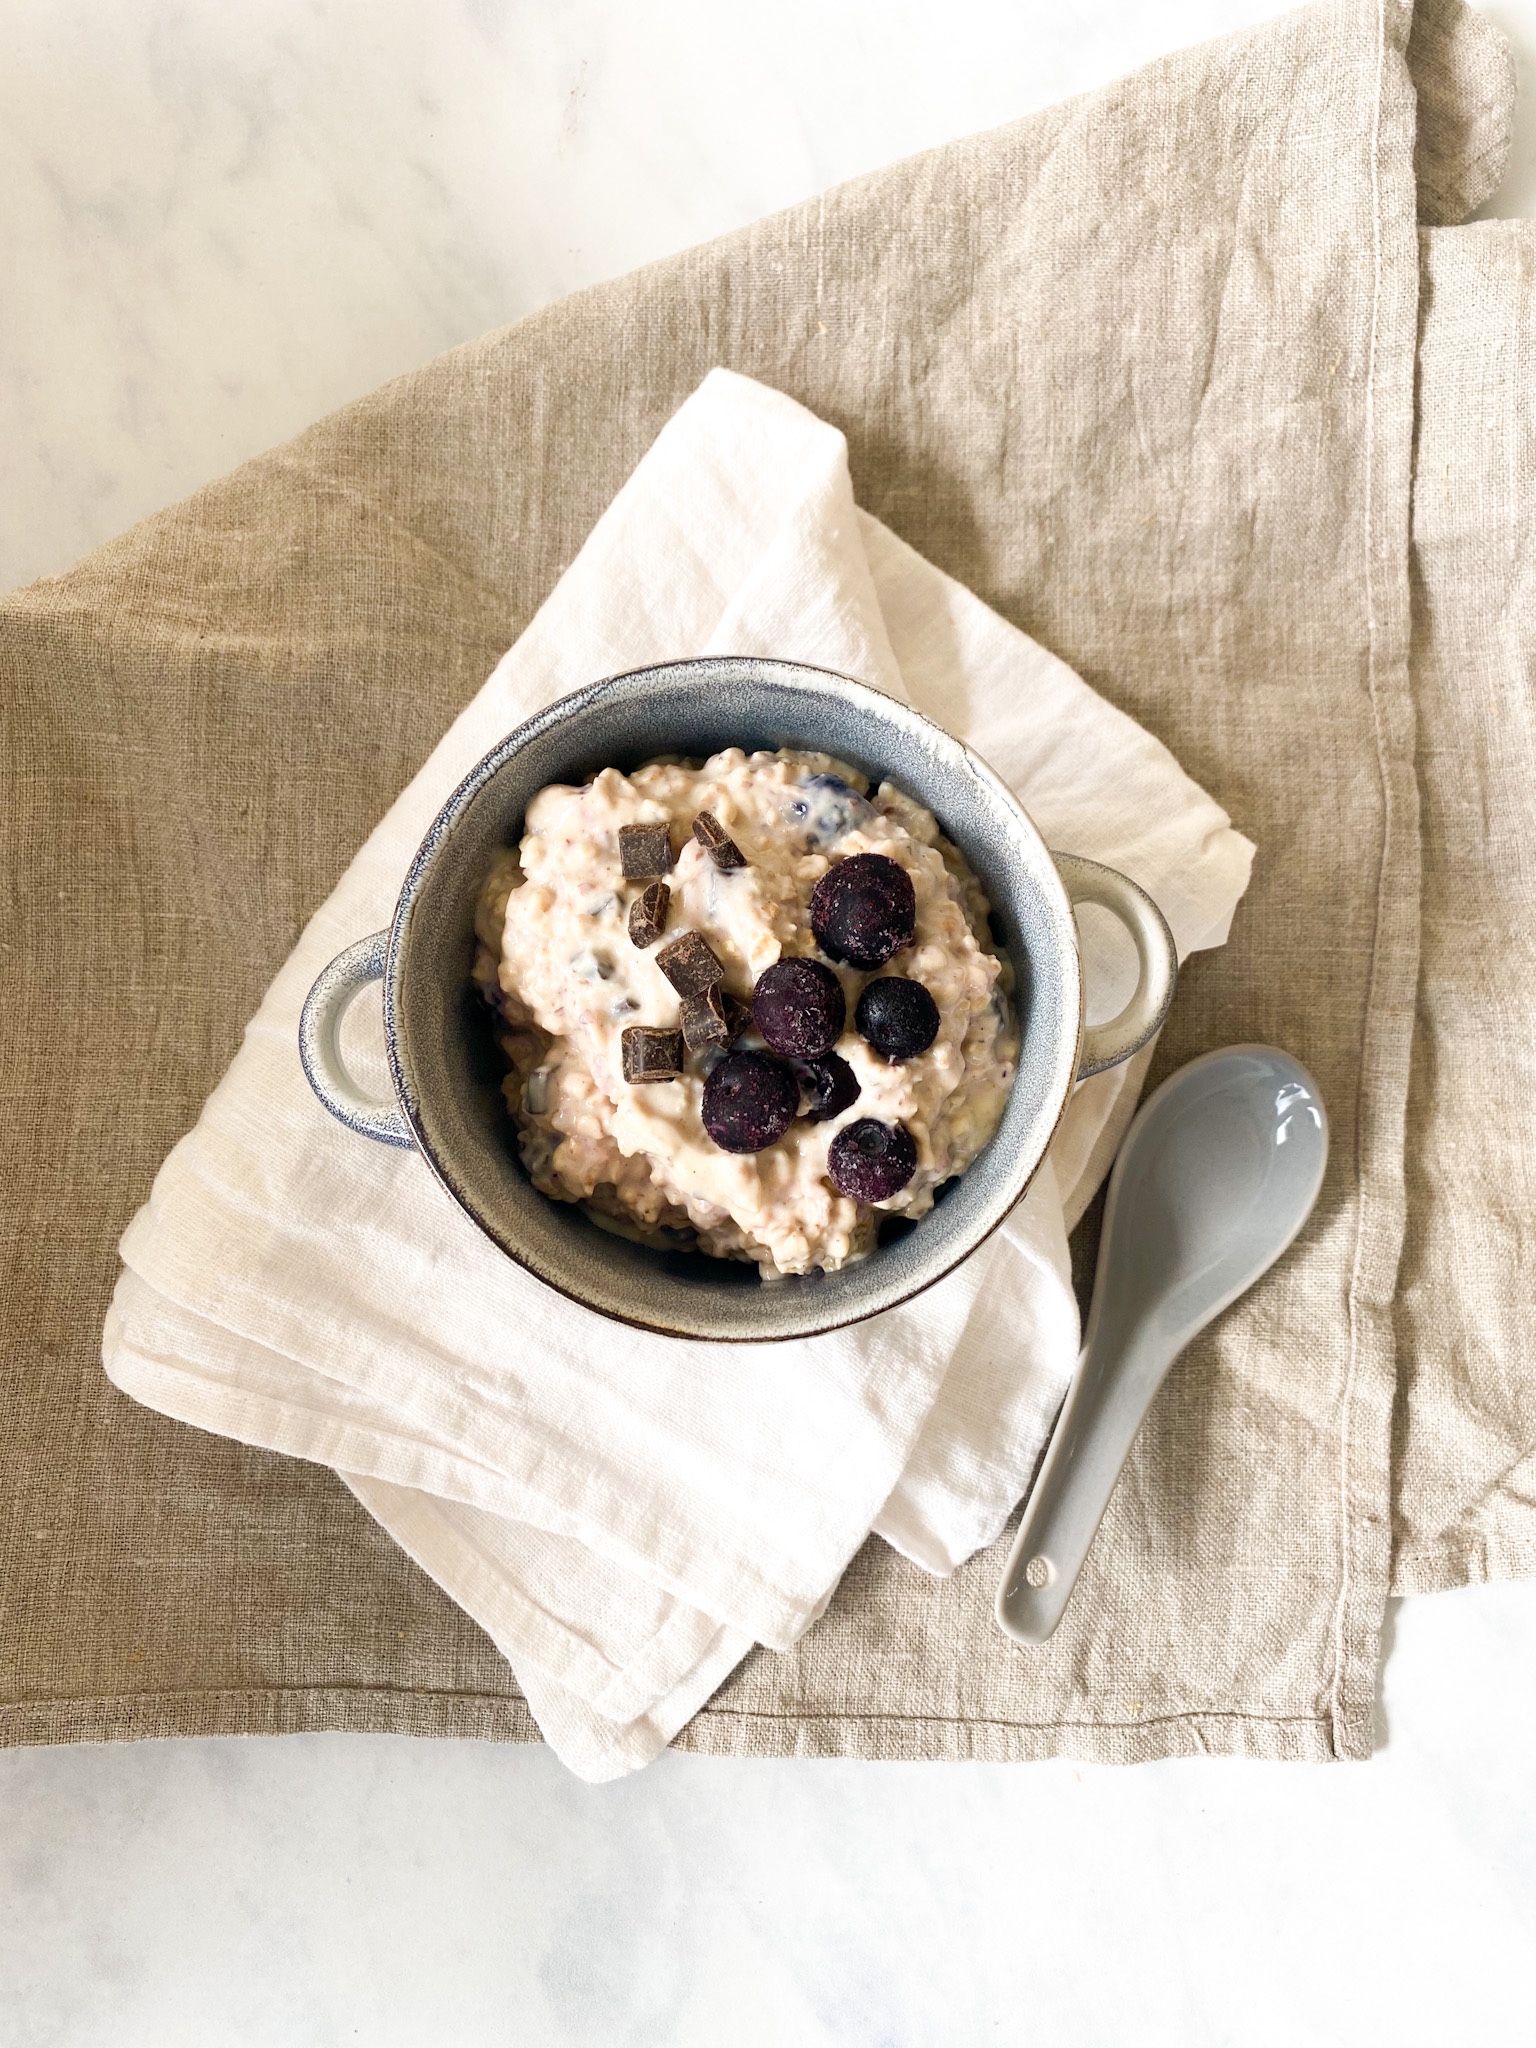 Quick and Easy Gluten Free Overnight Oats - Fearless Dining